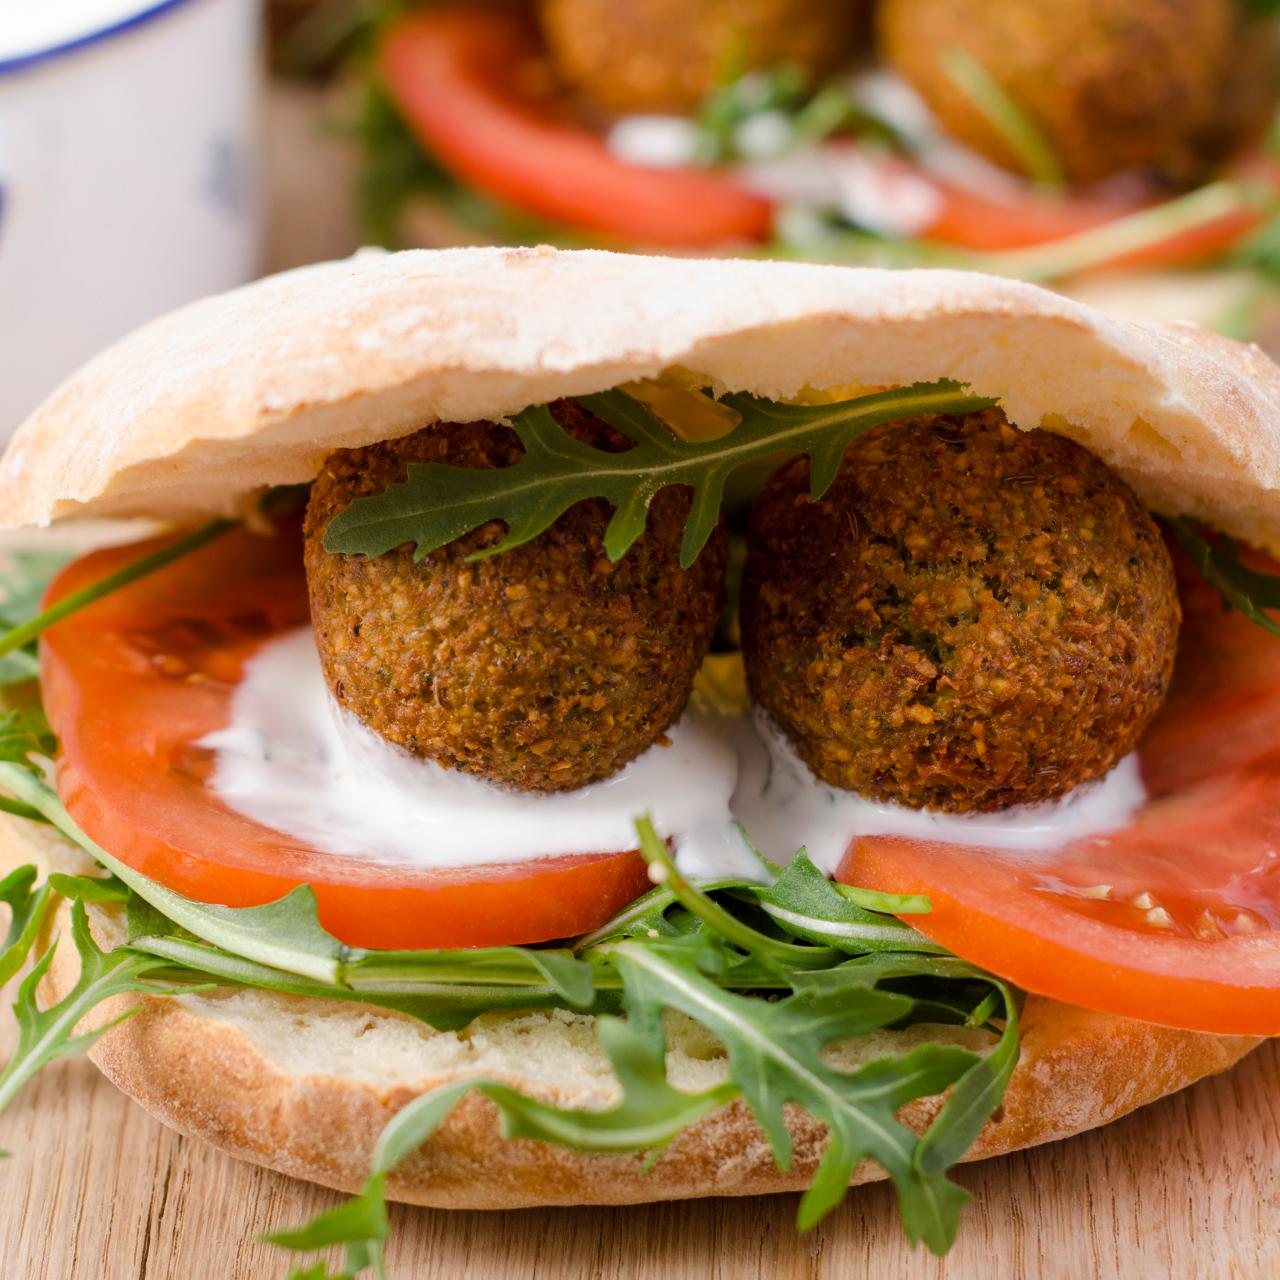 What Is Falafel? And How to Make Falafel, Cooking School